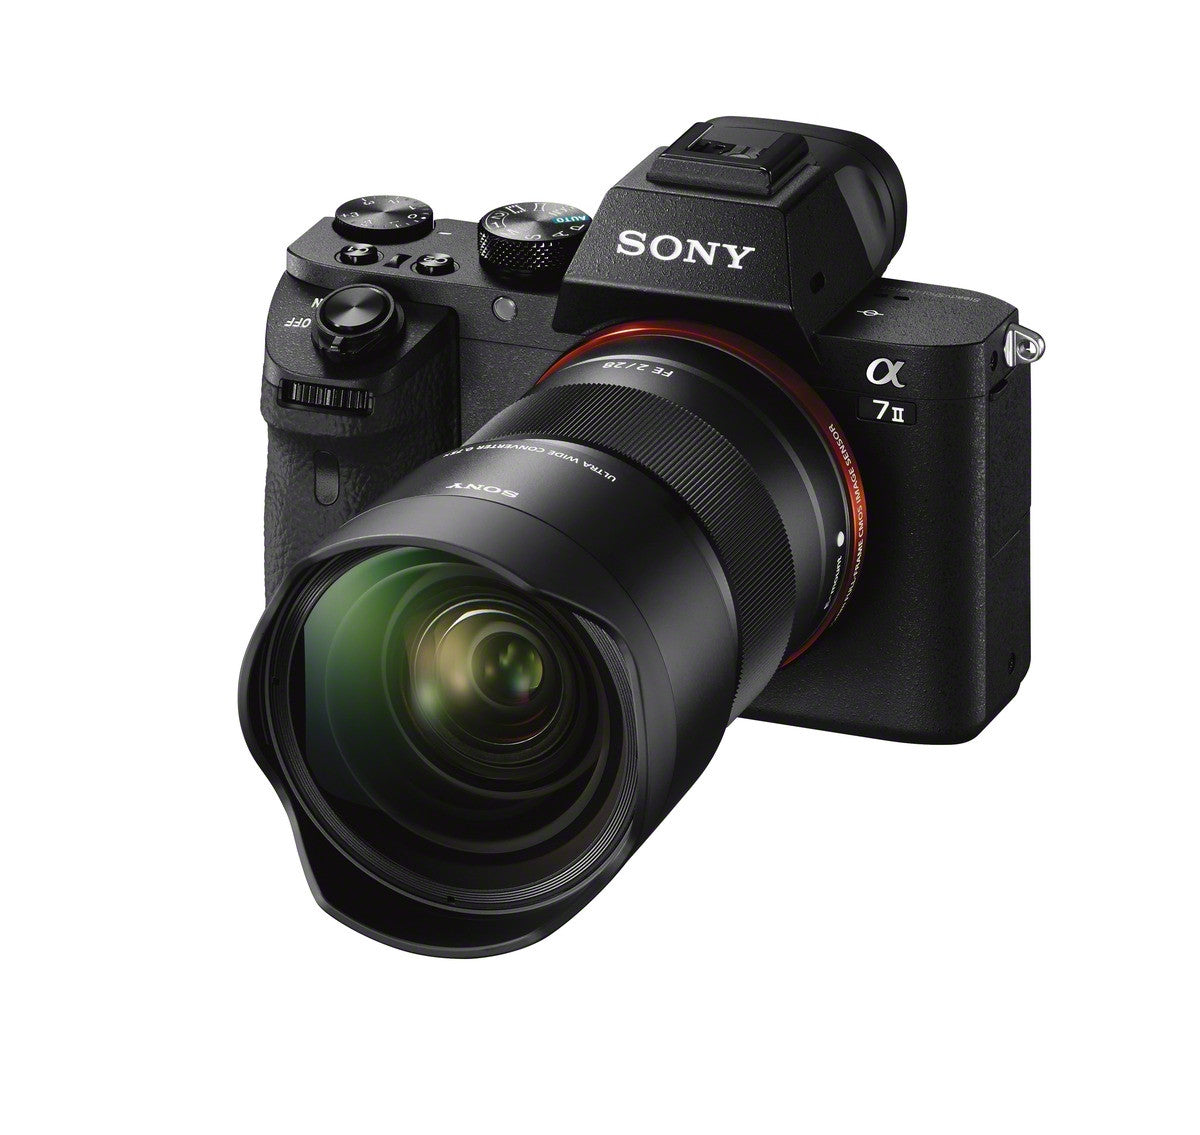 Sony 21mm Ultra Wide Converter for 28mm f2, lenses optics & accessories, Sony - Pictureline  - 5